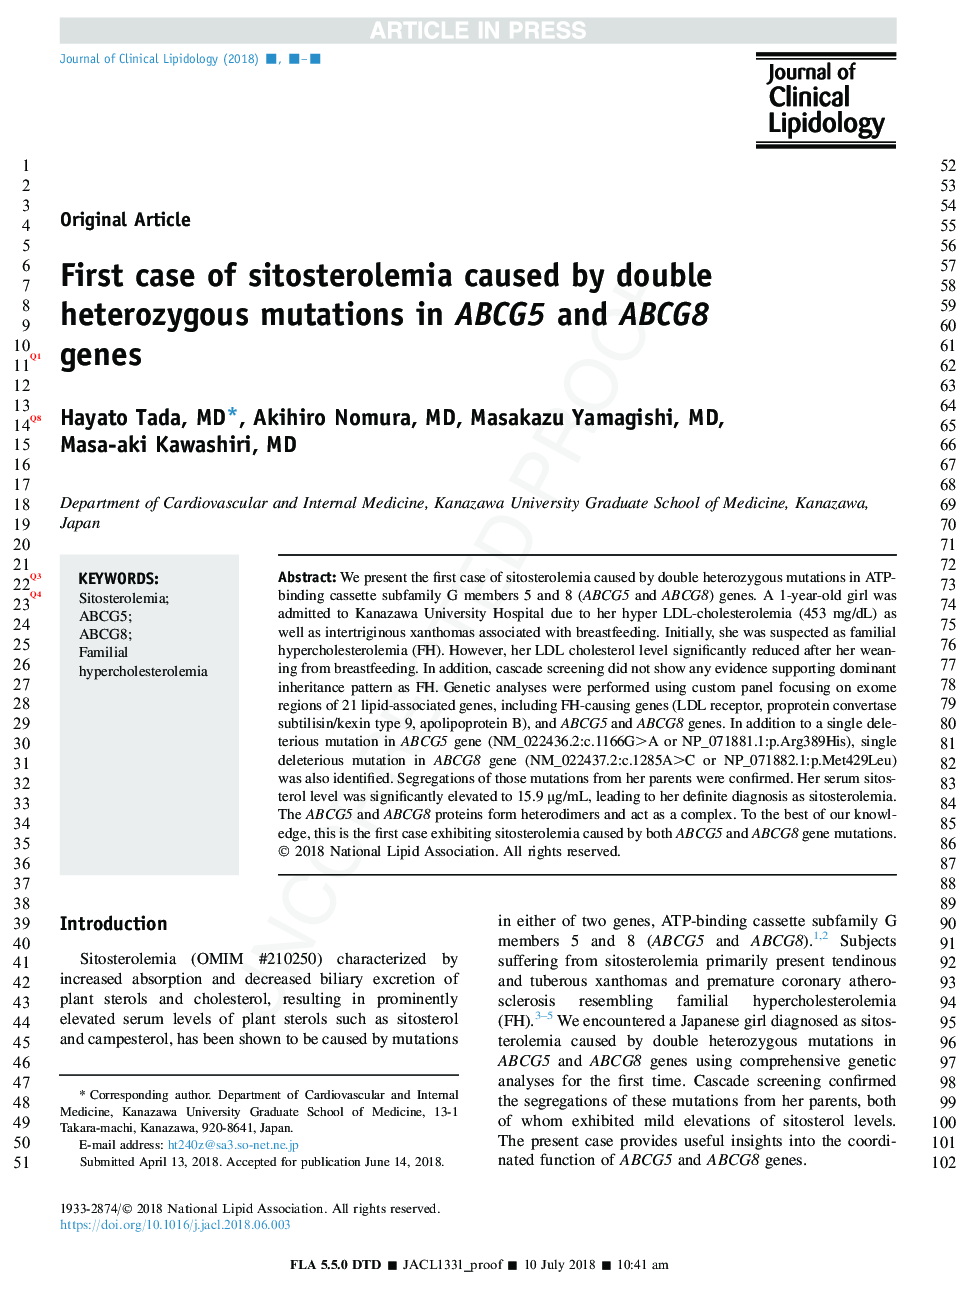 First case of sitosterolemia caused by double heterozygous mutations in ABCG5 and ABCG8 genes